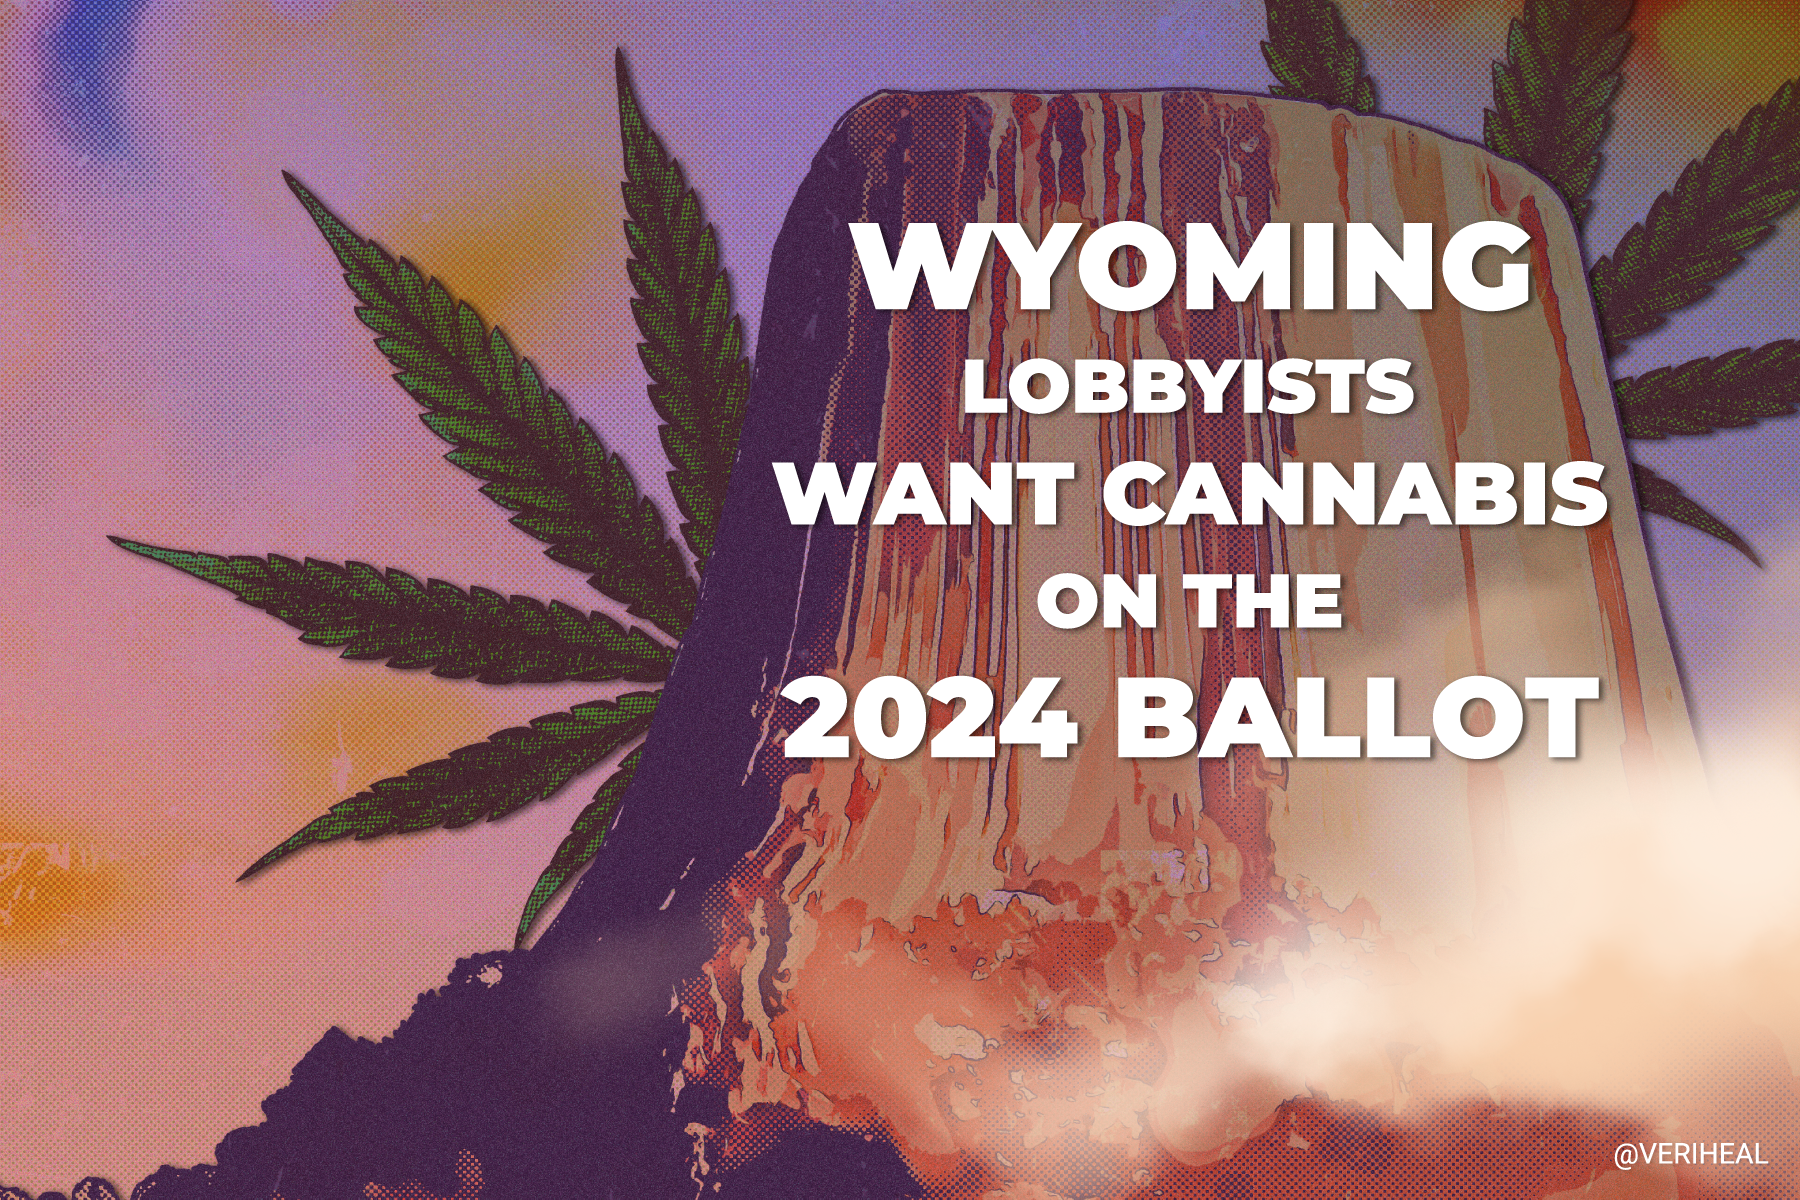 Wyoming Cannabis Lobbyists Endeavor to Get Two Cannabis Initiatives Featured on 2024 Ballot